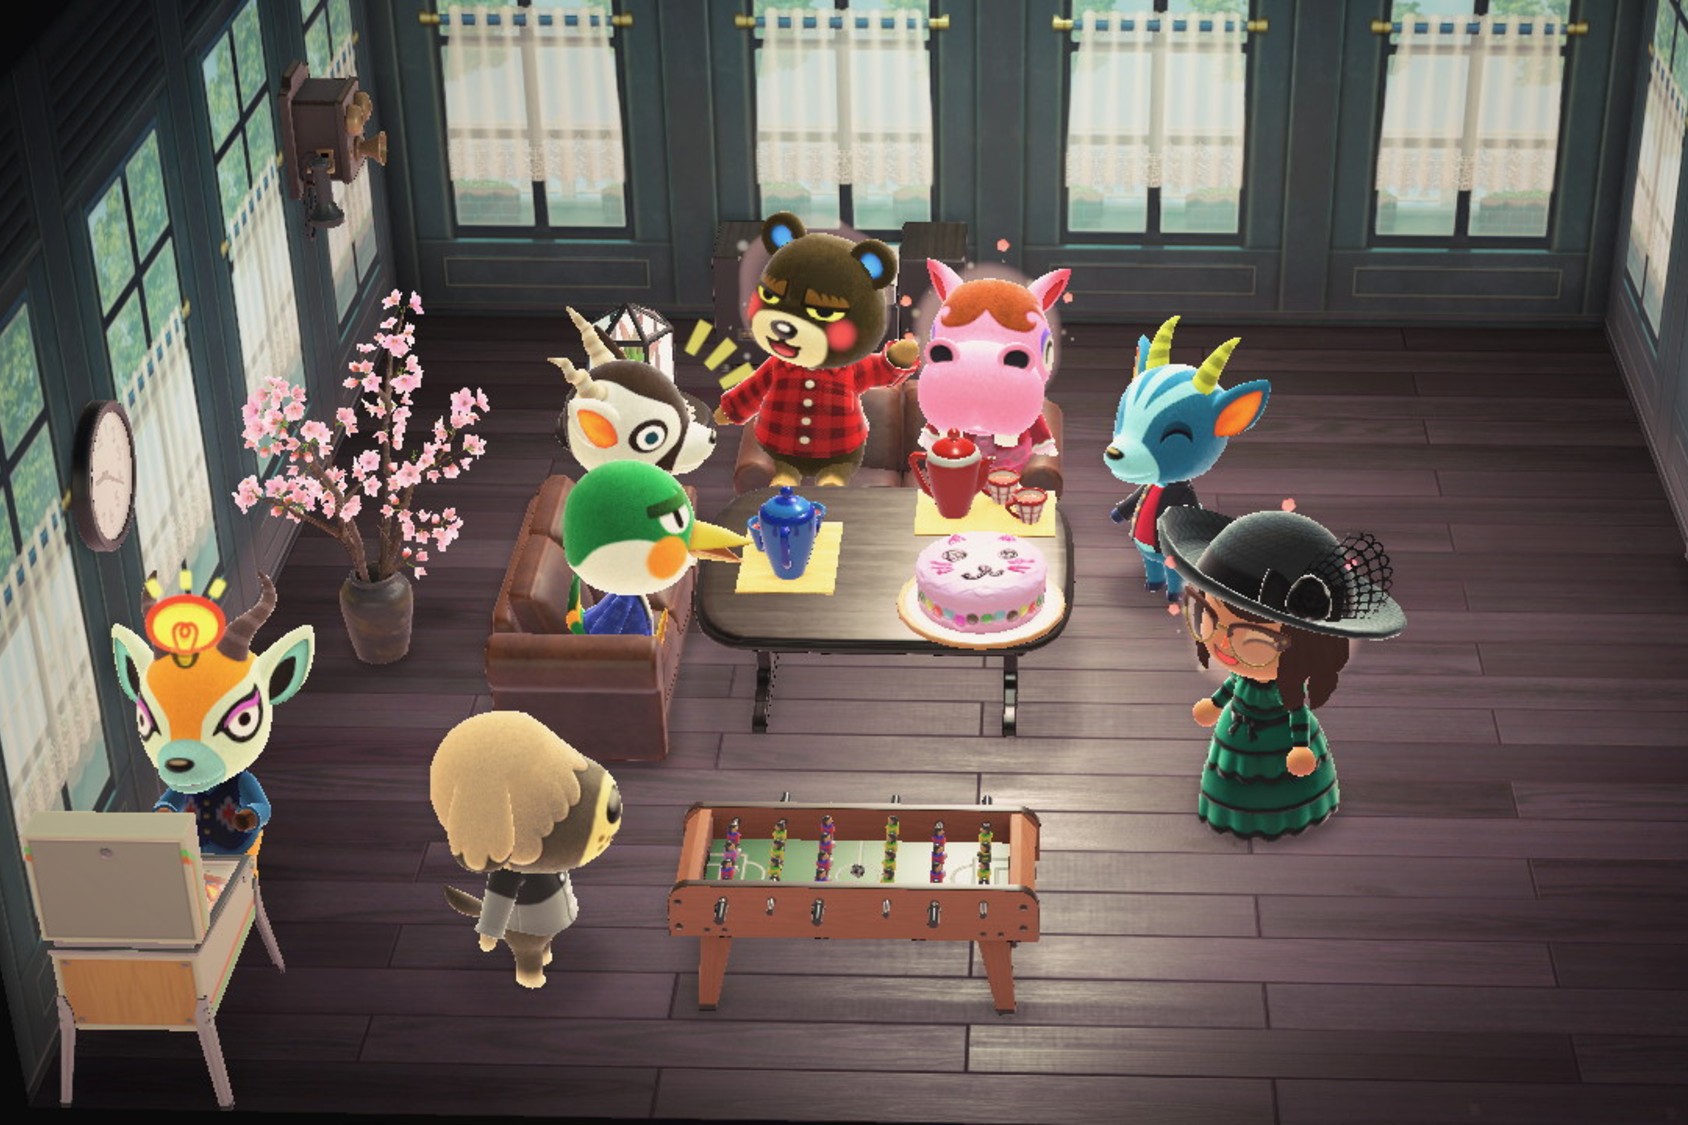 Important Animal Crossing Facts For New Players